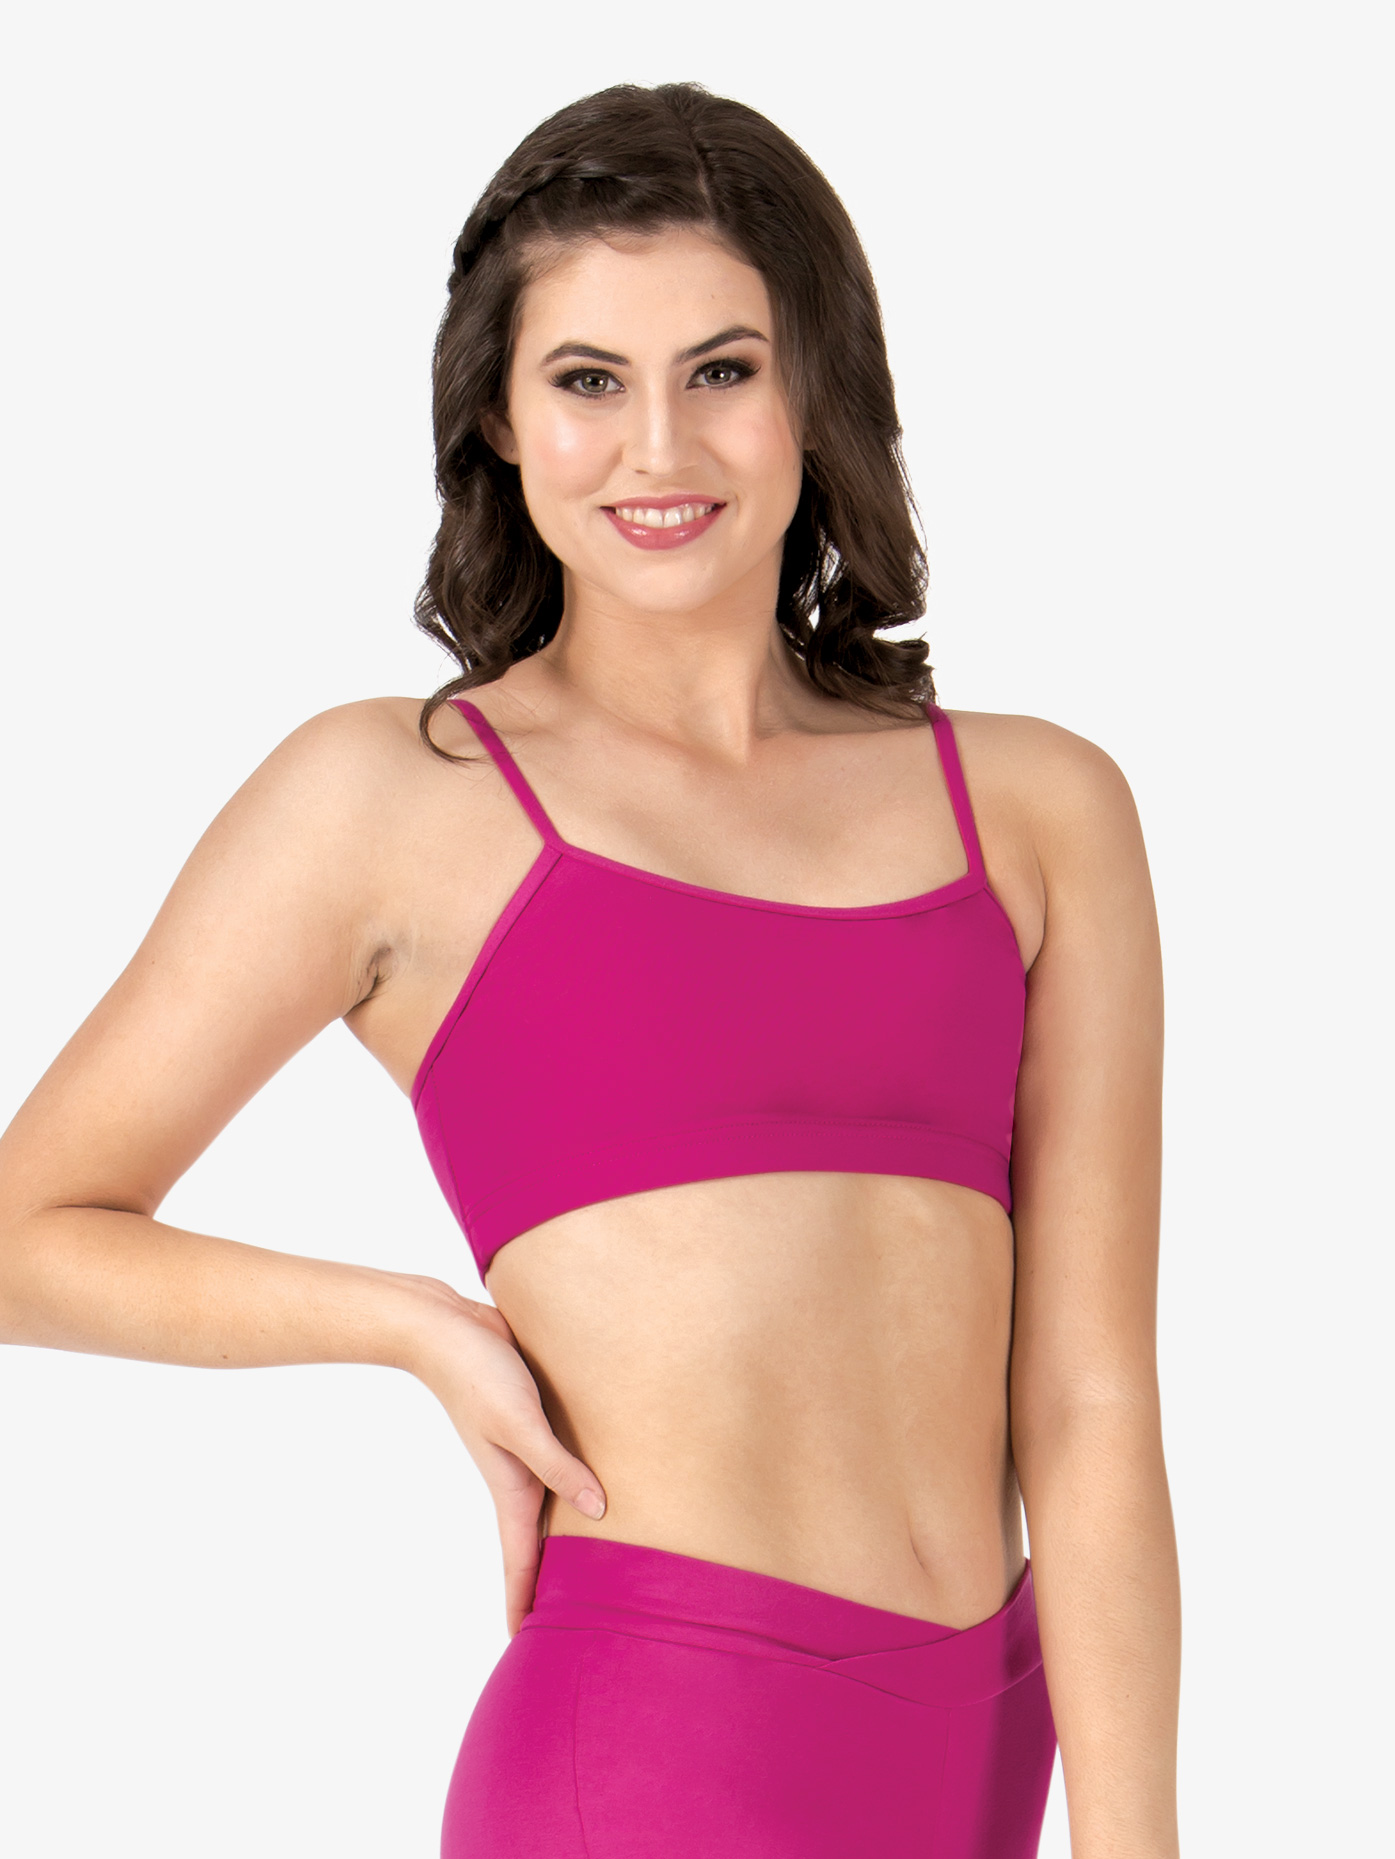 Adult Camisole Bra Top - Style No N5503. Loading zoom